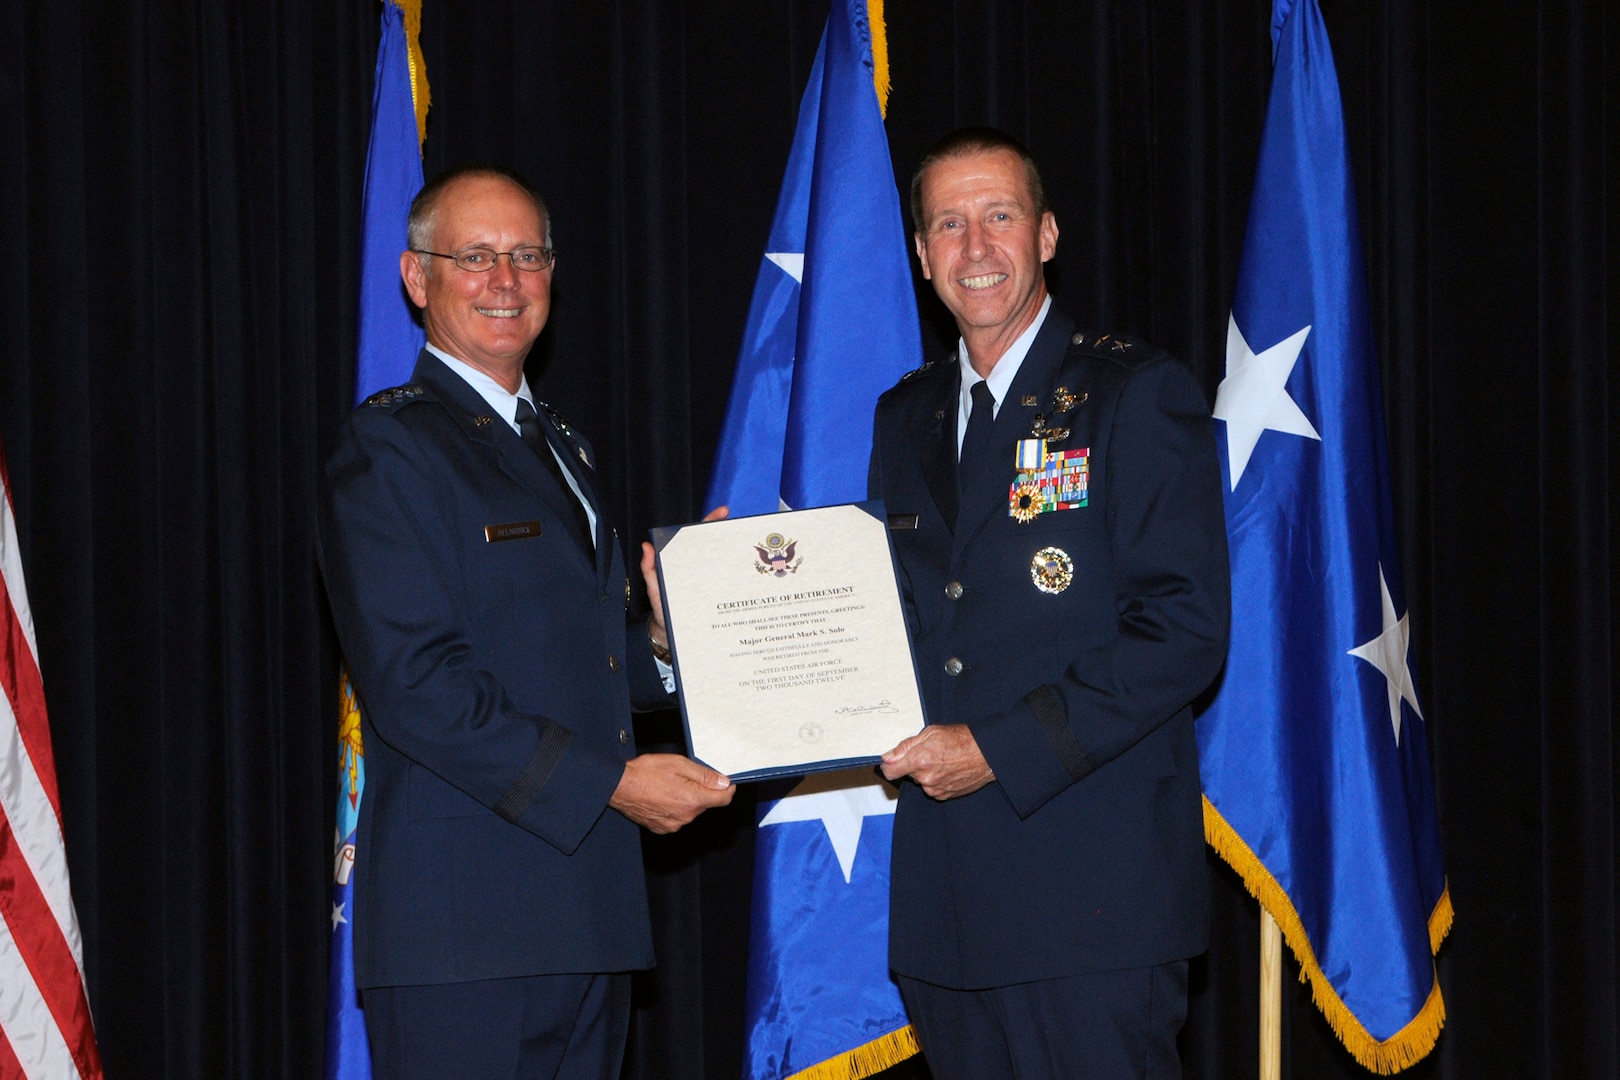 Lt. Gen. Robert Allardice, Air Mobility Command vice commander, presents a certificate of retirement to Maj. Gen. Mark Solo, 19th Air Force commander, at Joint Base San Antonio-Randolph, Texas, July 13.  Solo's retirement came the day after the inactivation of the 19th AF. (U.S. Air Force photo by Don Lindsey) 